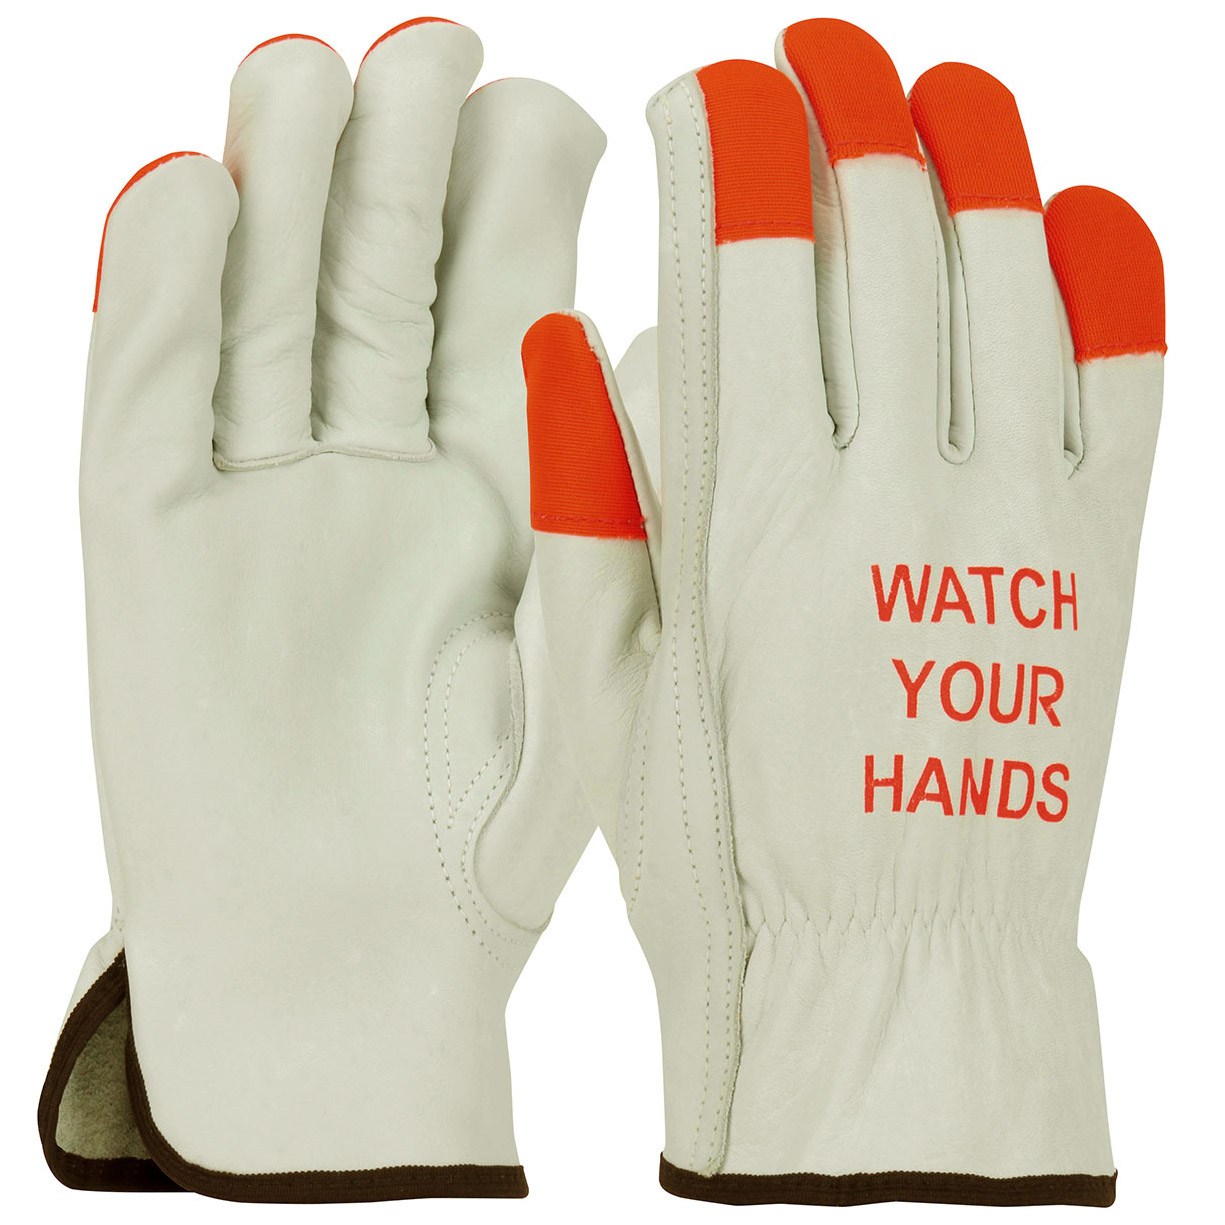 PIP® 68-165HV Superior Grade General Purpose Gloves, Drivers, Top Grain Cowhide Leather Palm, Top Grain Cowhide Leather, Hi-Viz Orange/Natural, Slip-On Cuff, Uncoated Coating, Resists: Abrasion, Unlined Lining, Keystone Thumb